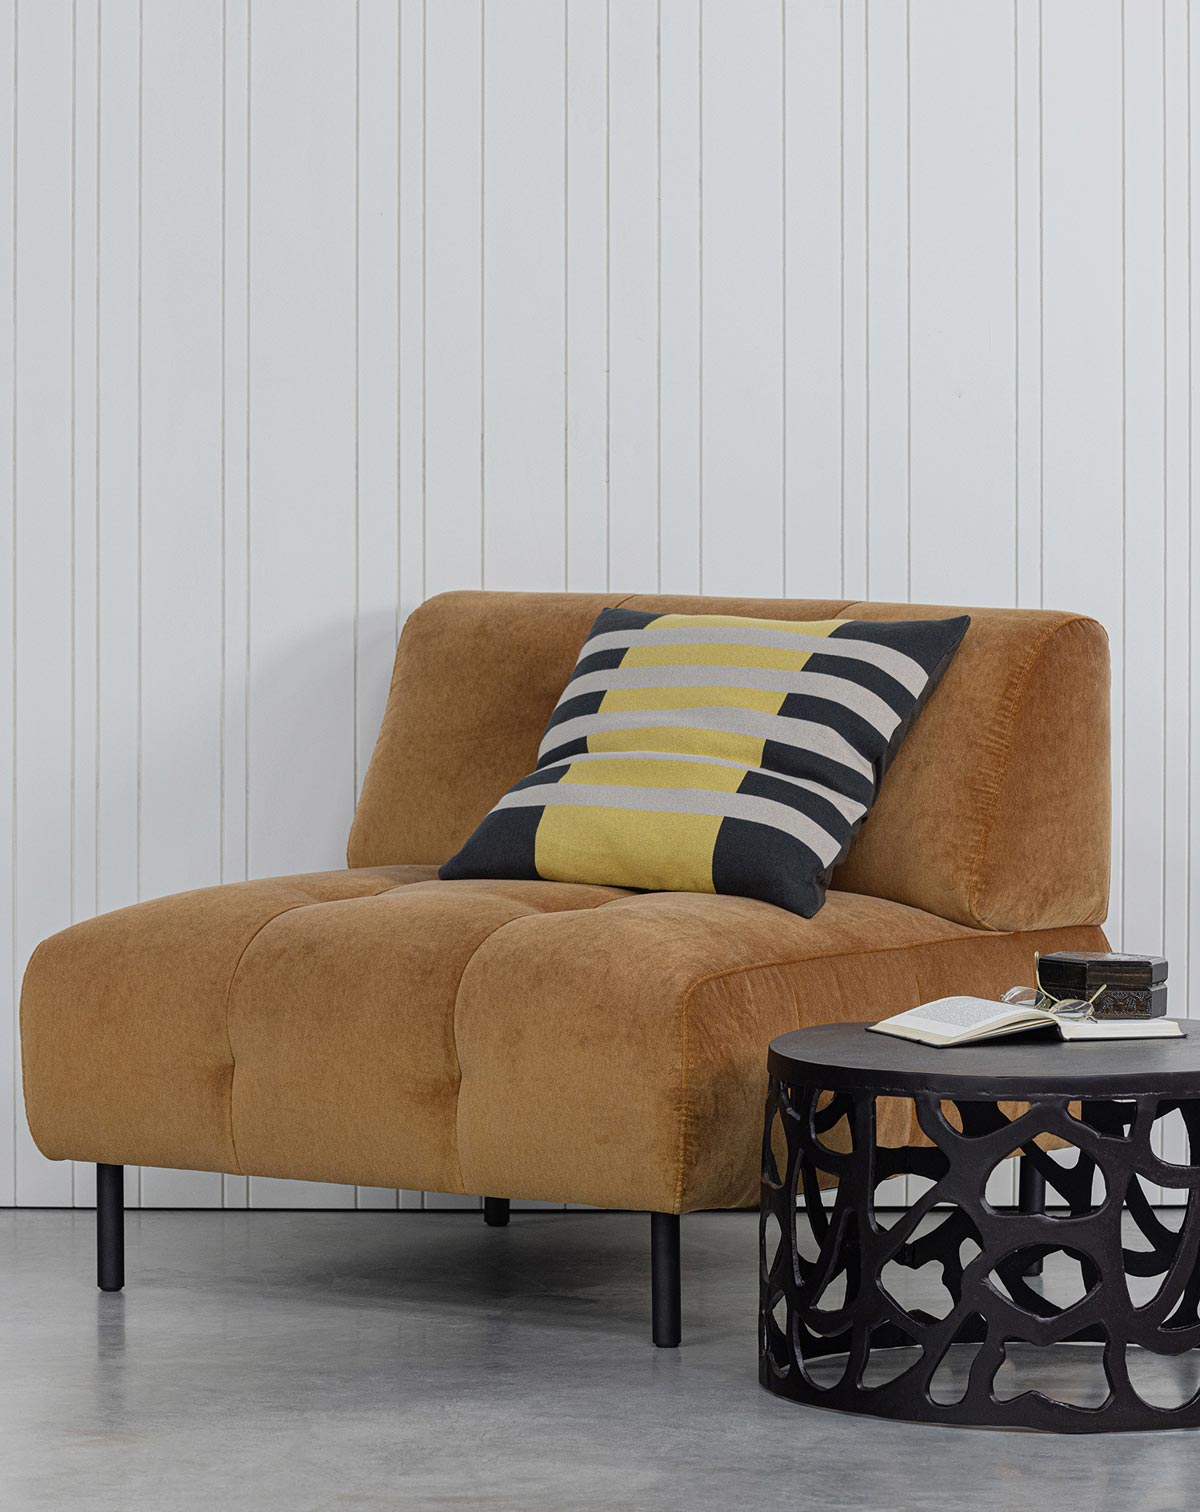 Deer Industries Lifestyle Furniture Store Singapore, Decorative Throw Cushion, Micky Cushion Stripe Cast Iron from Woood, Grey and Yellow Stripes Cushion